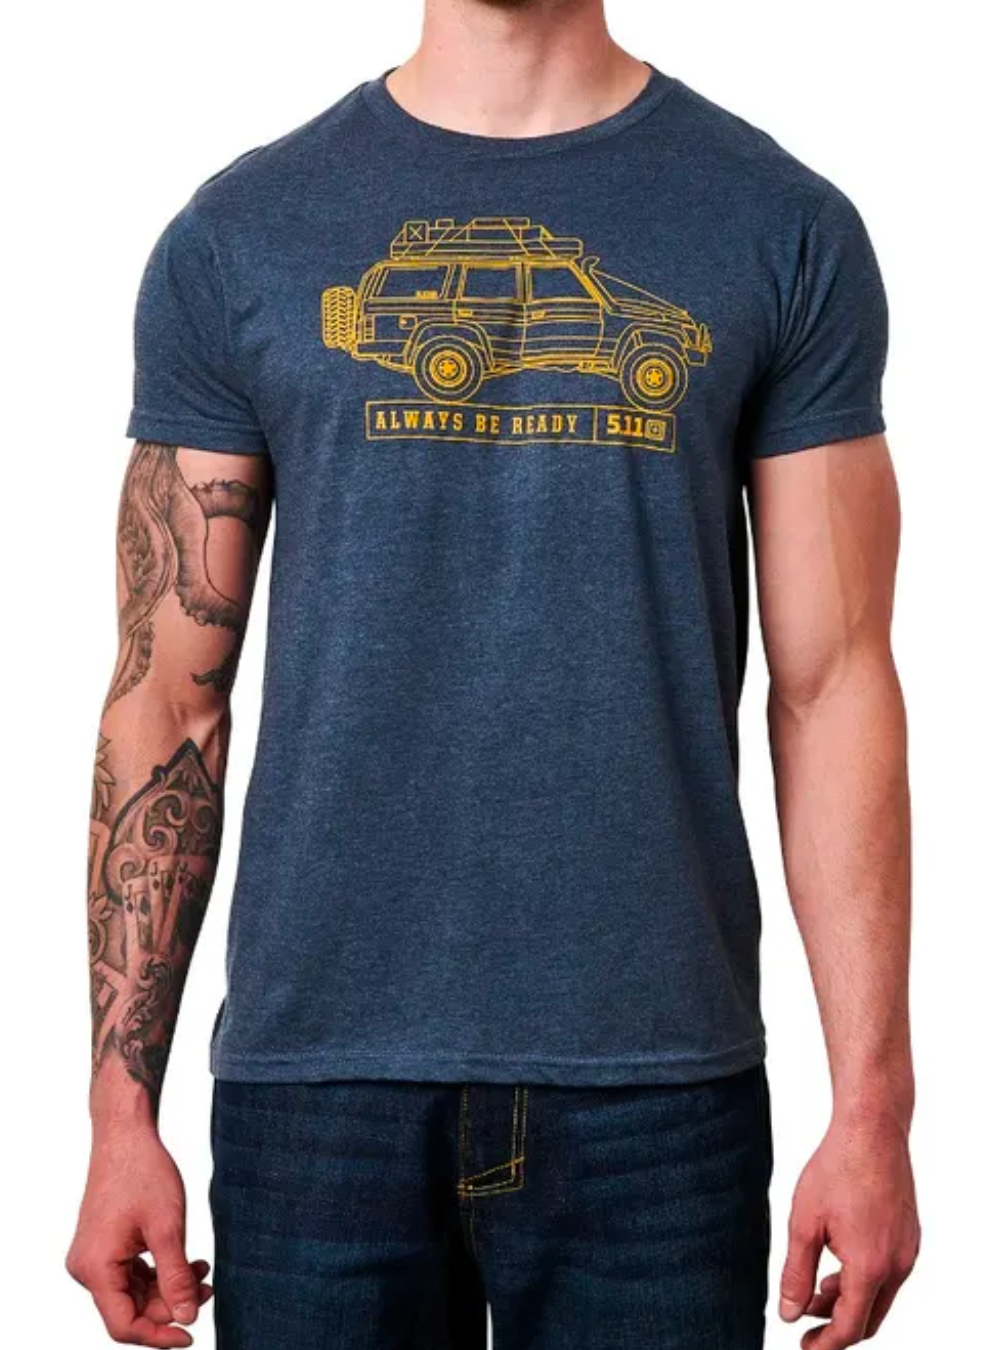 5.11 Tactical Offroad Dreamin' Tee